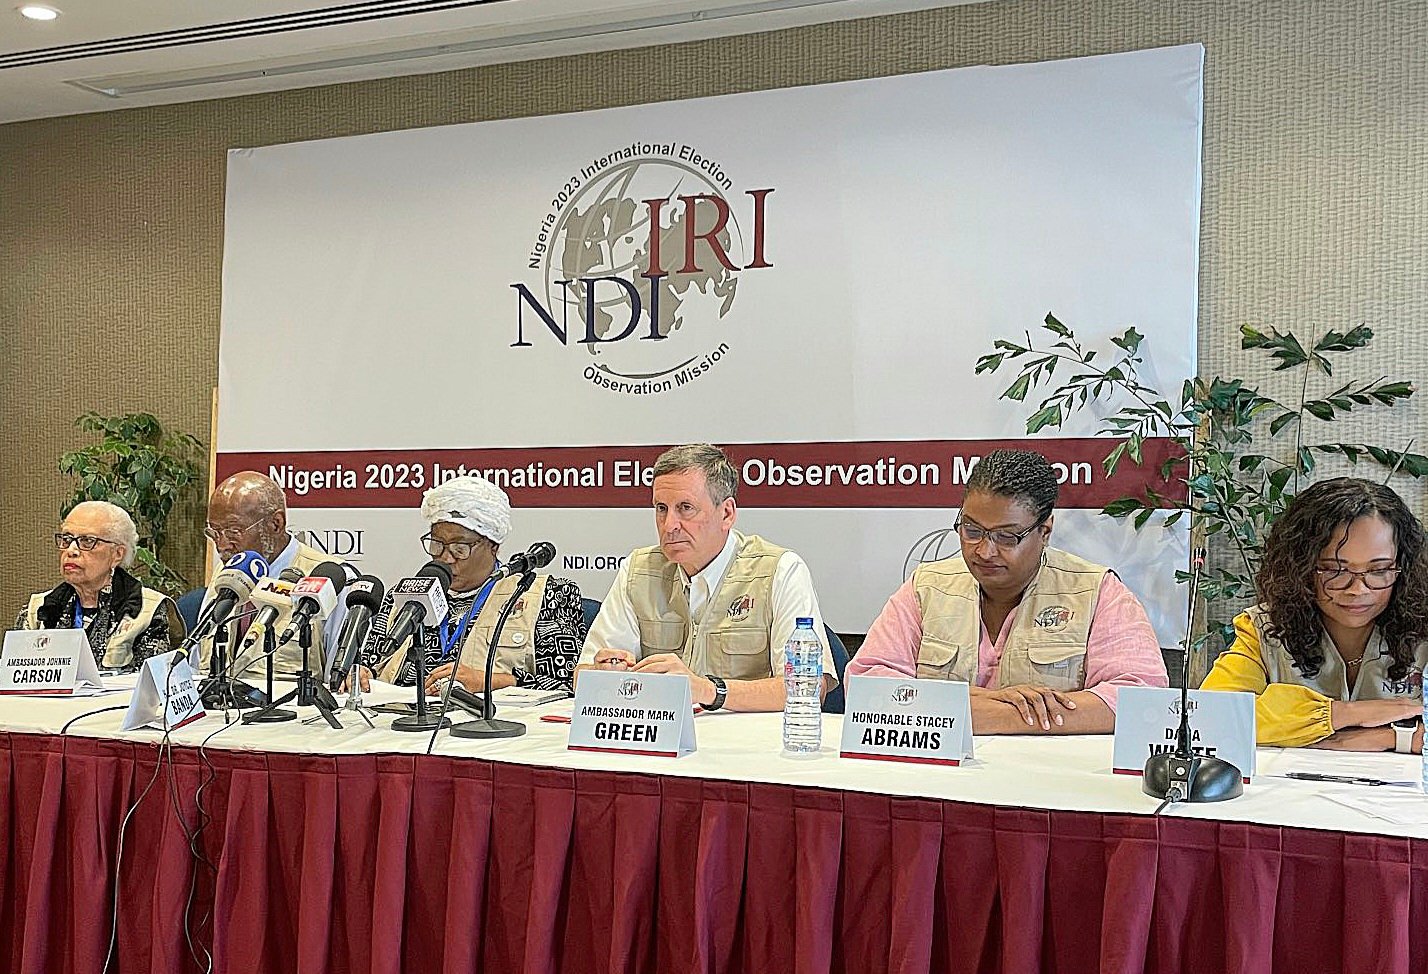 BREAKING: Nigeria elections below expectations, INEC lacked transparency – NDI/IRI observers